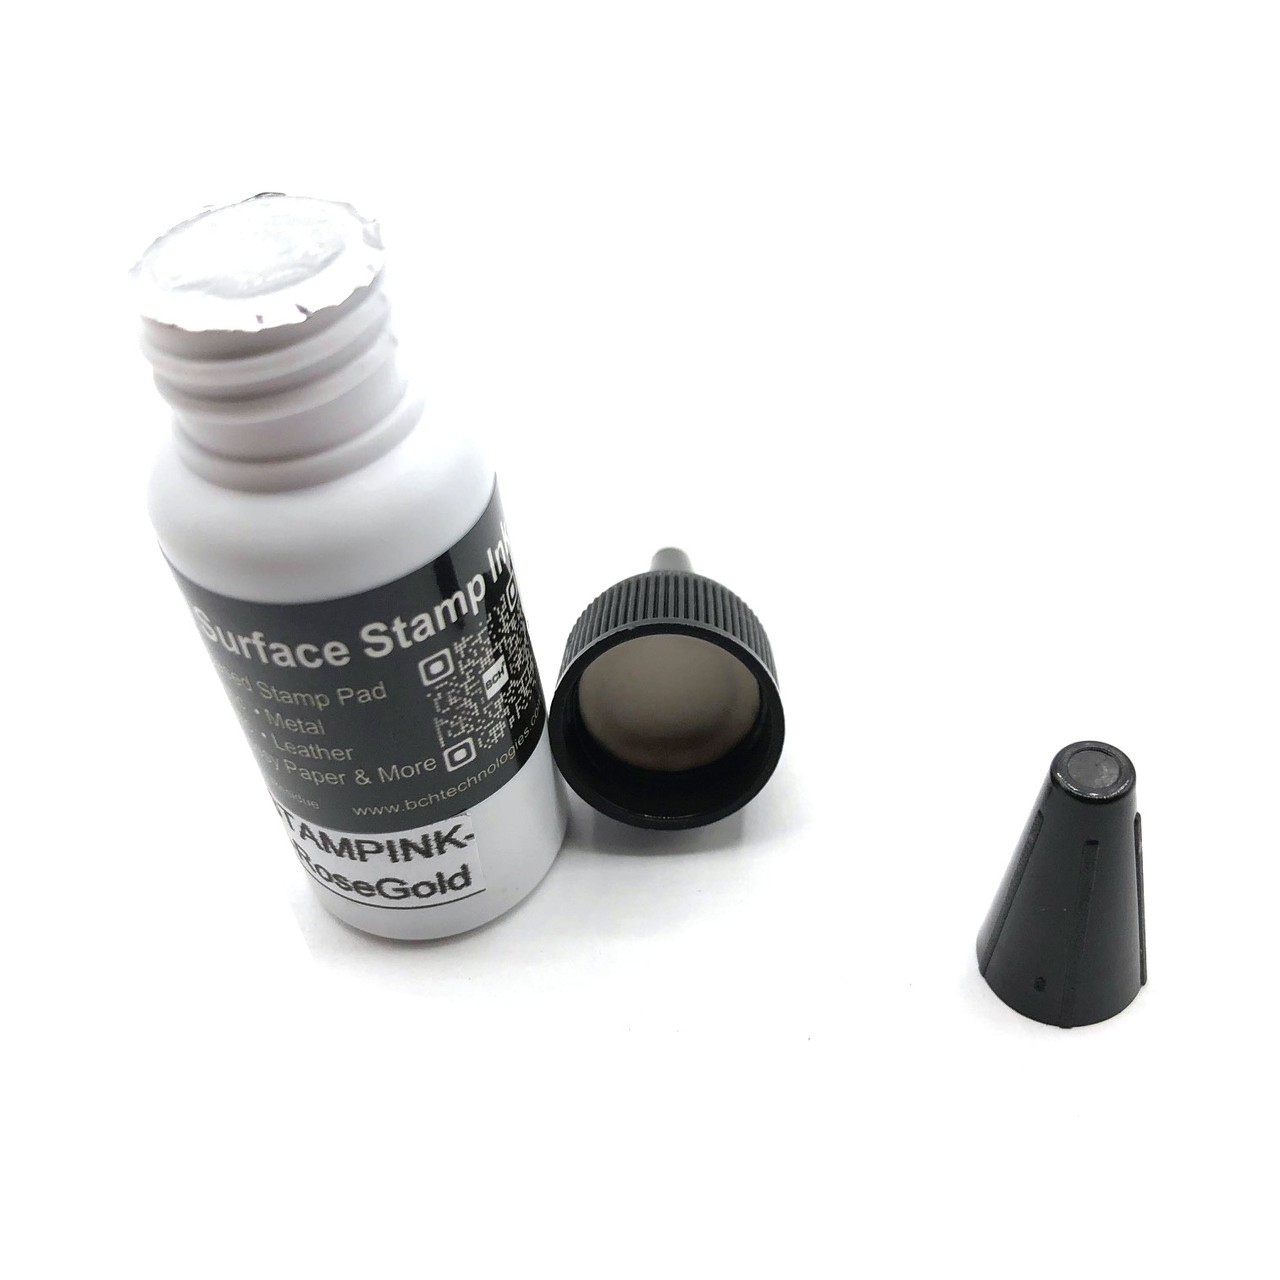 BCH Premium All Surface Stamp Ink Solvent Based Fast Dry Black